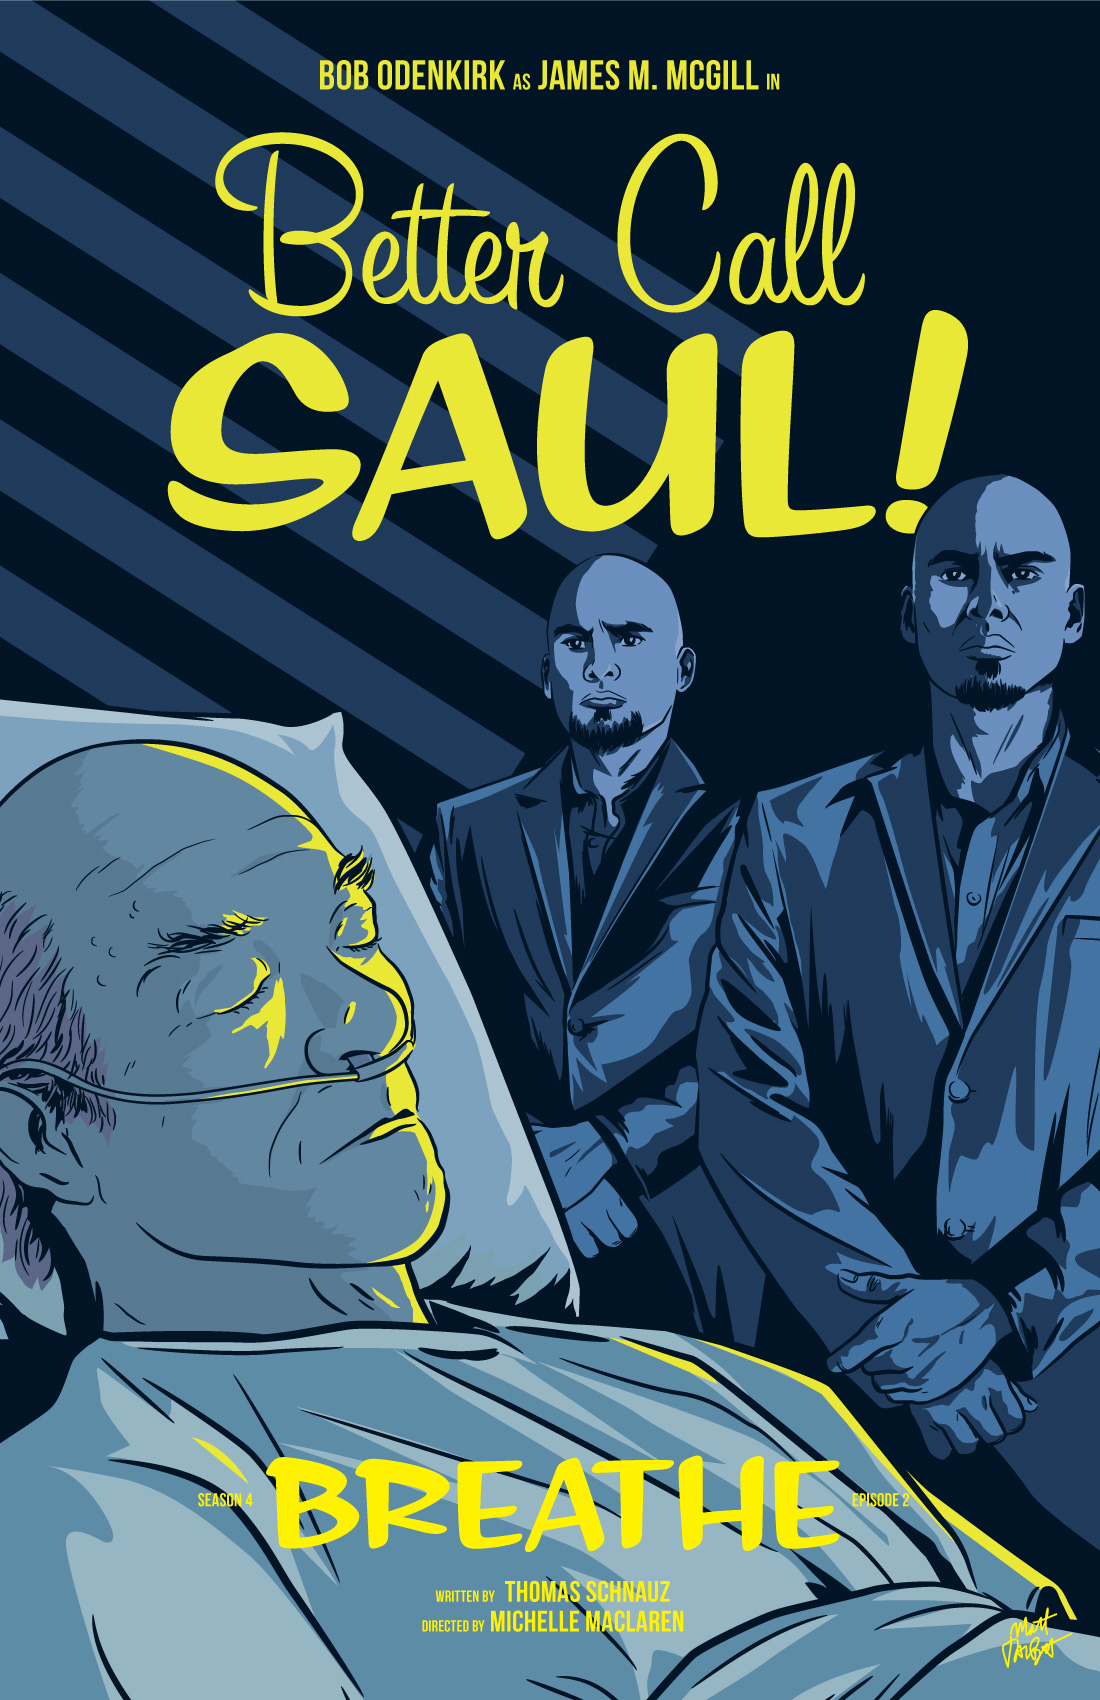 Better Call Saul Posters Better Call Saul Season 5 Official Poster